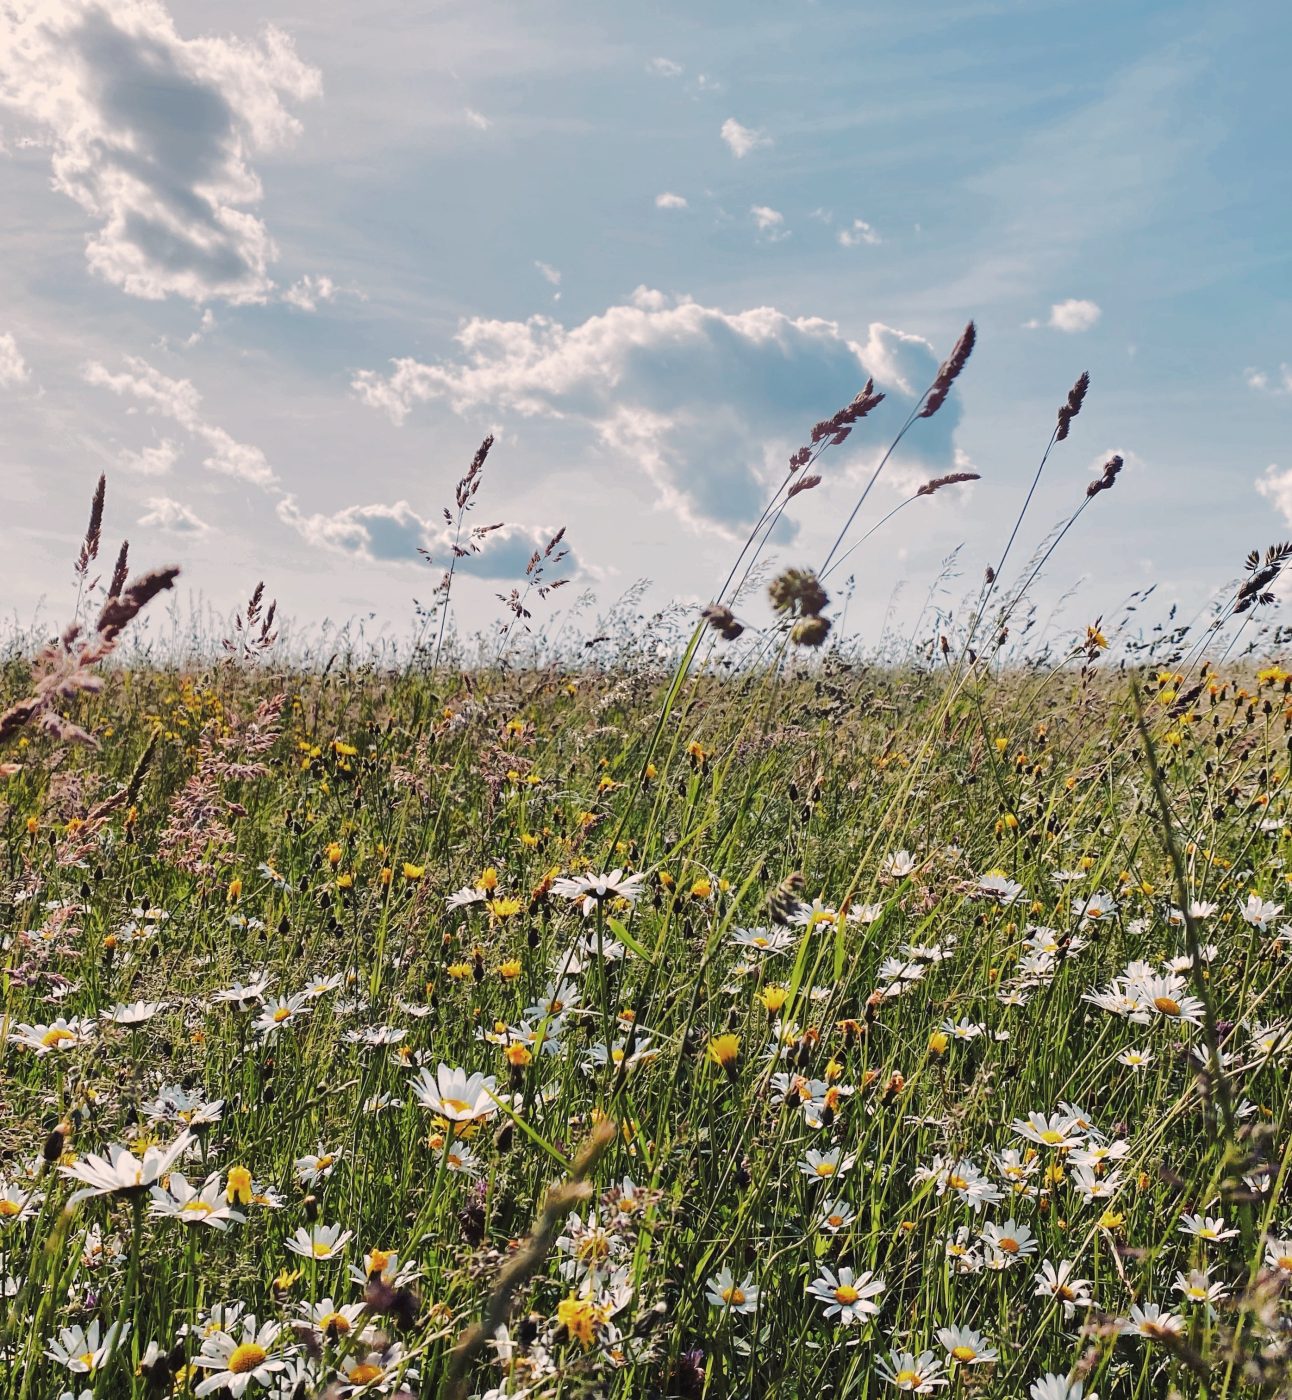 A meadow full of wild flowers, with blue skies and sunshine